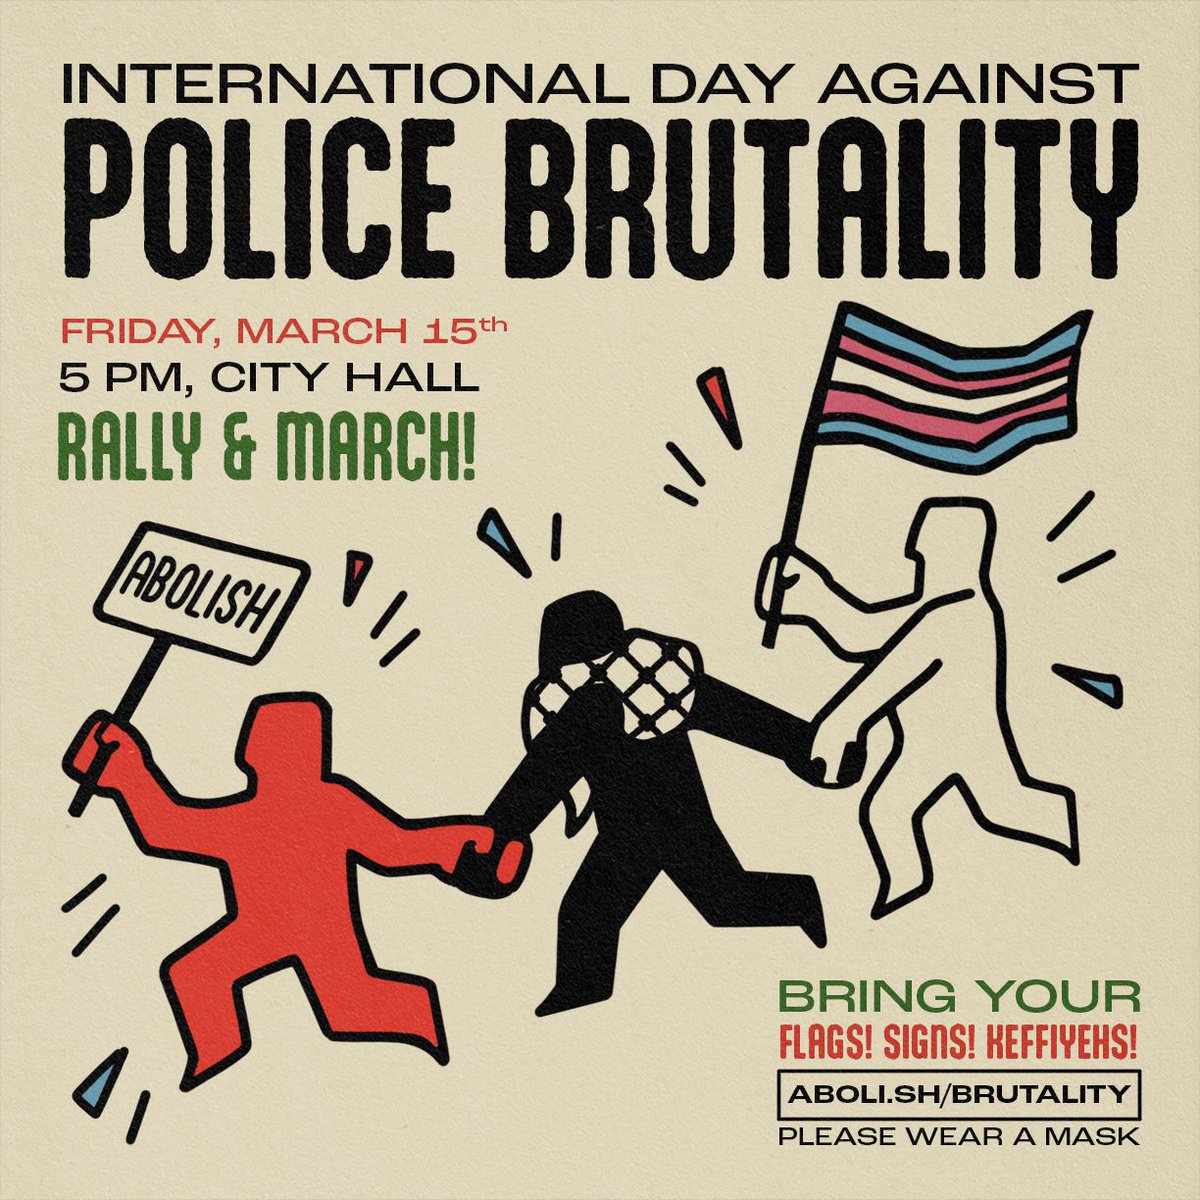 WINNIPEG - Here's the info for this year's International Day Against Police Brutality (IDAPB) action! WHAT: Rally & march WHEN: 5 pm on Friday, March 15 WHERE: Starting at City Hall BRING: Flags, signs, keffiyehs, masks ASL interpreting will be provided aboli.sh/brutality